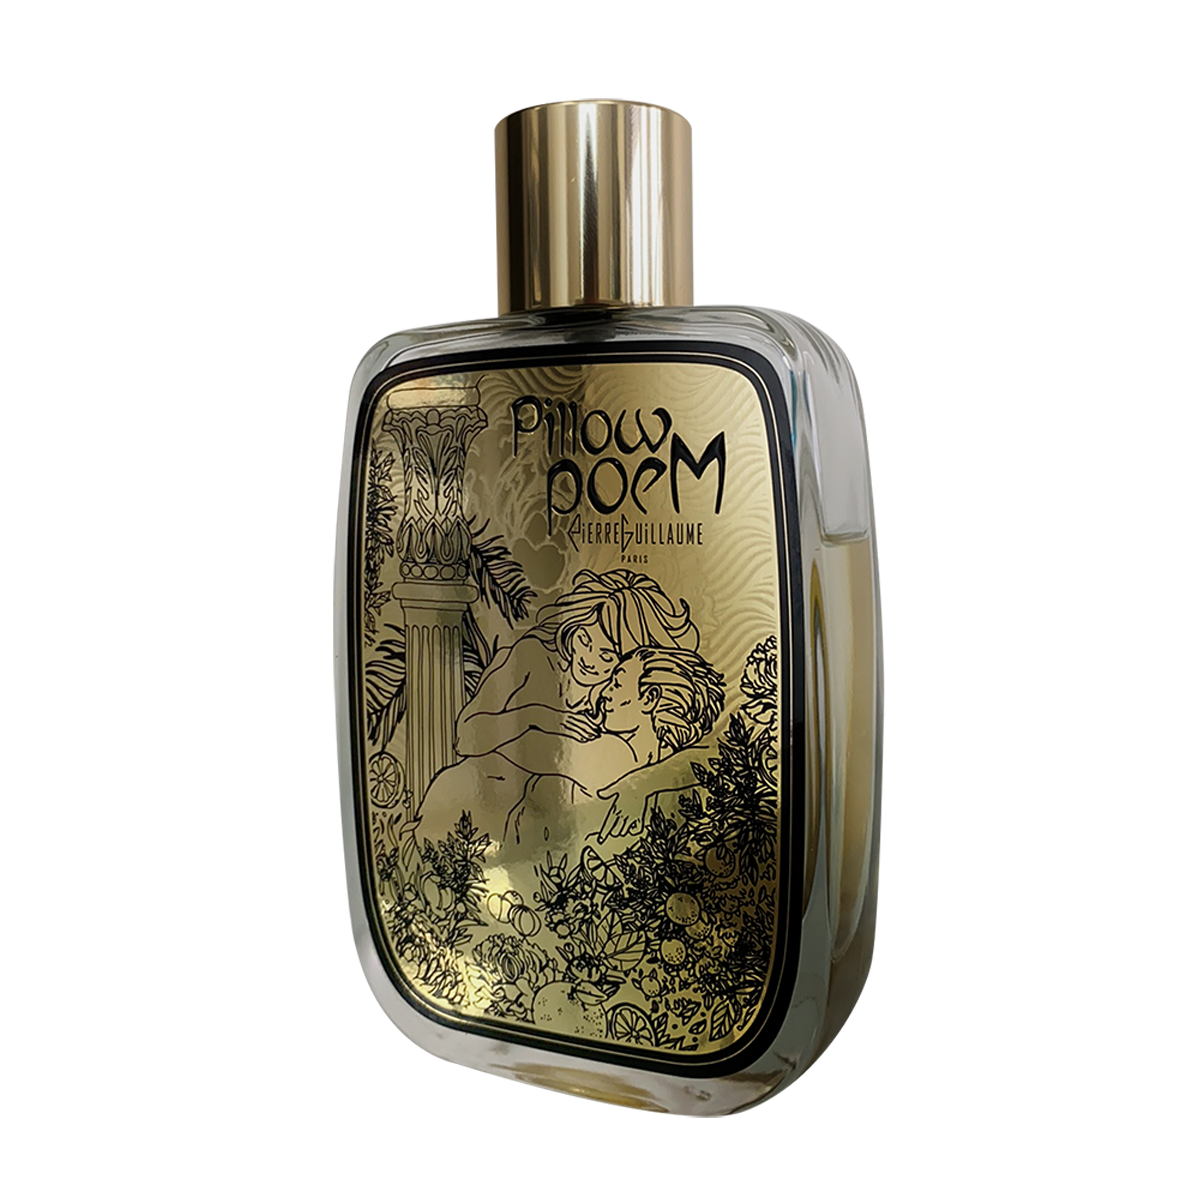 Pillowpoem Refreshing Perfume for Sheets and Room 100ml